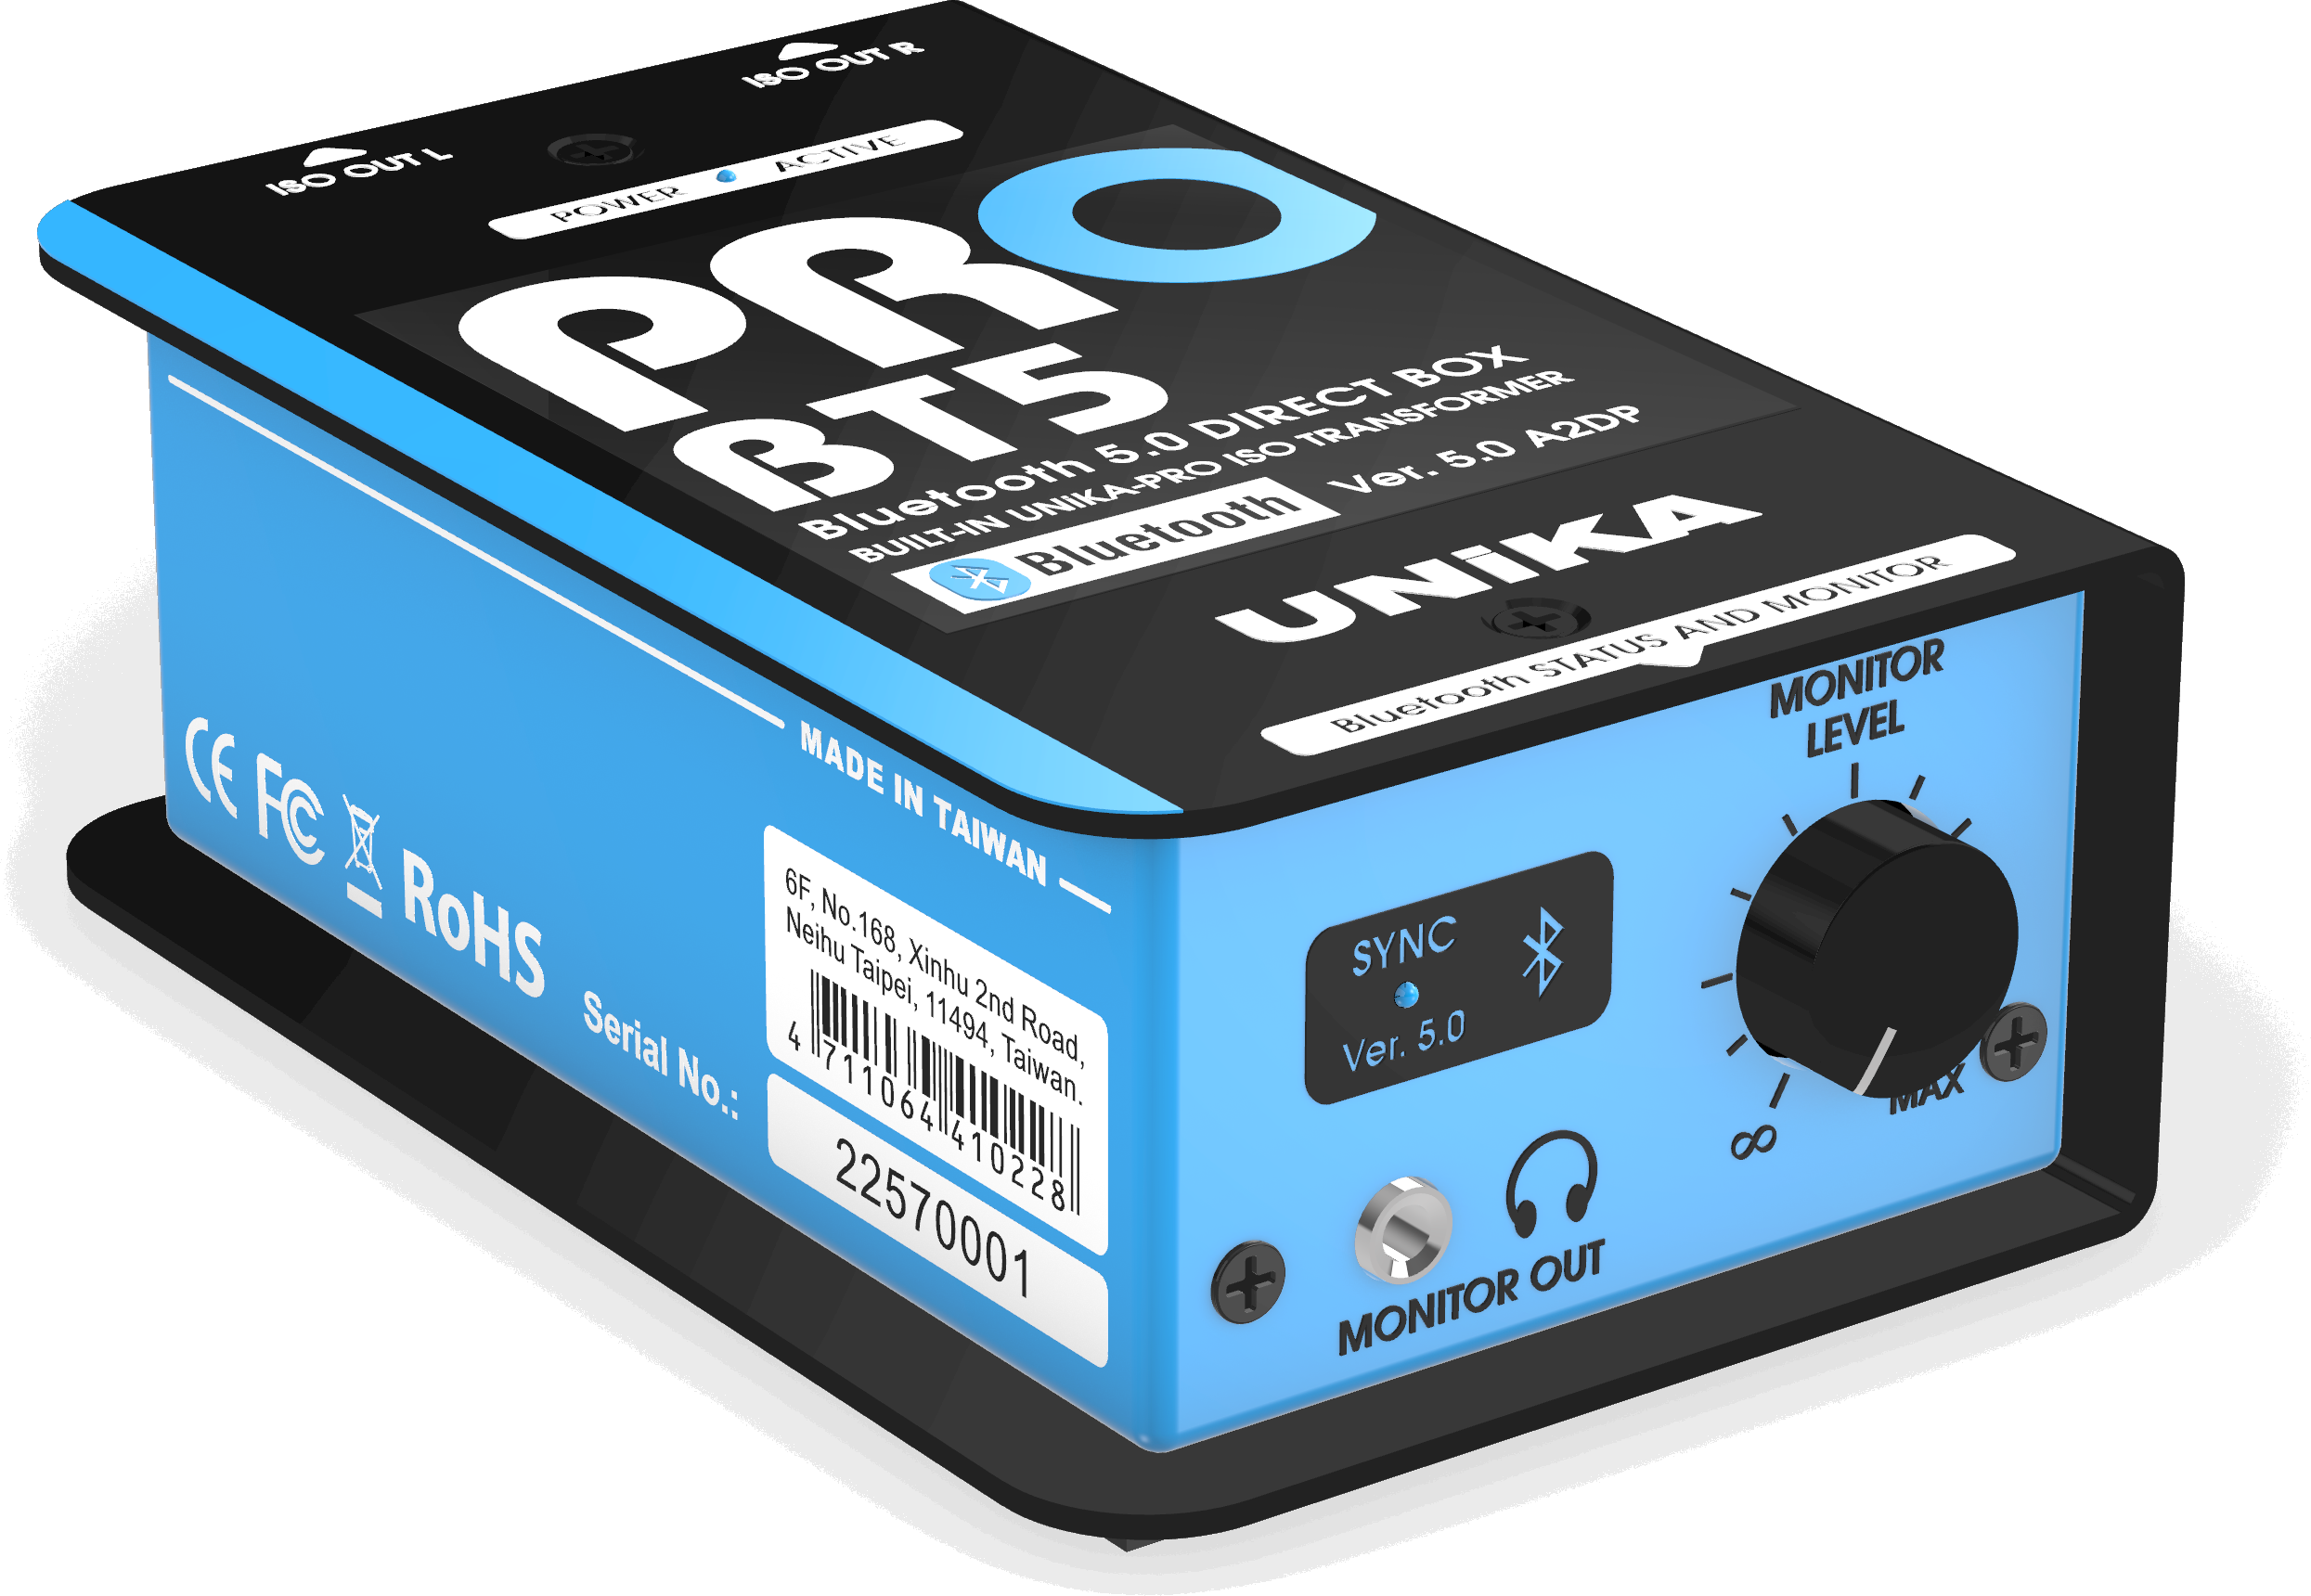 Unika Pro Debuts New Box Series and Stage Series